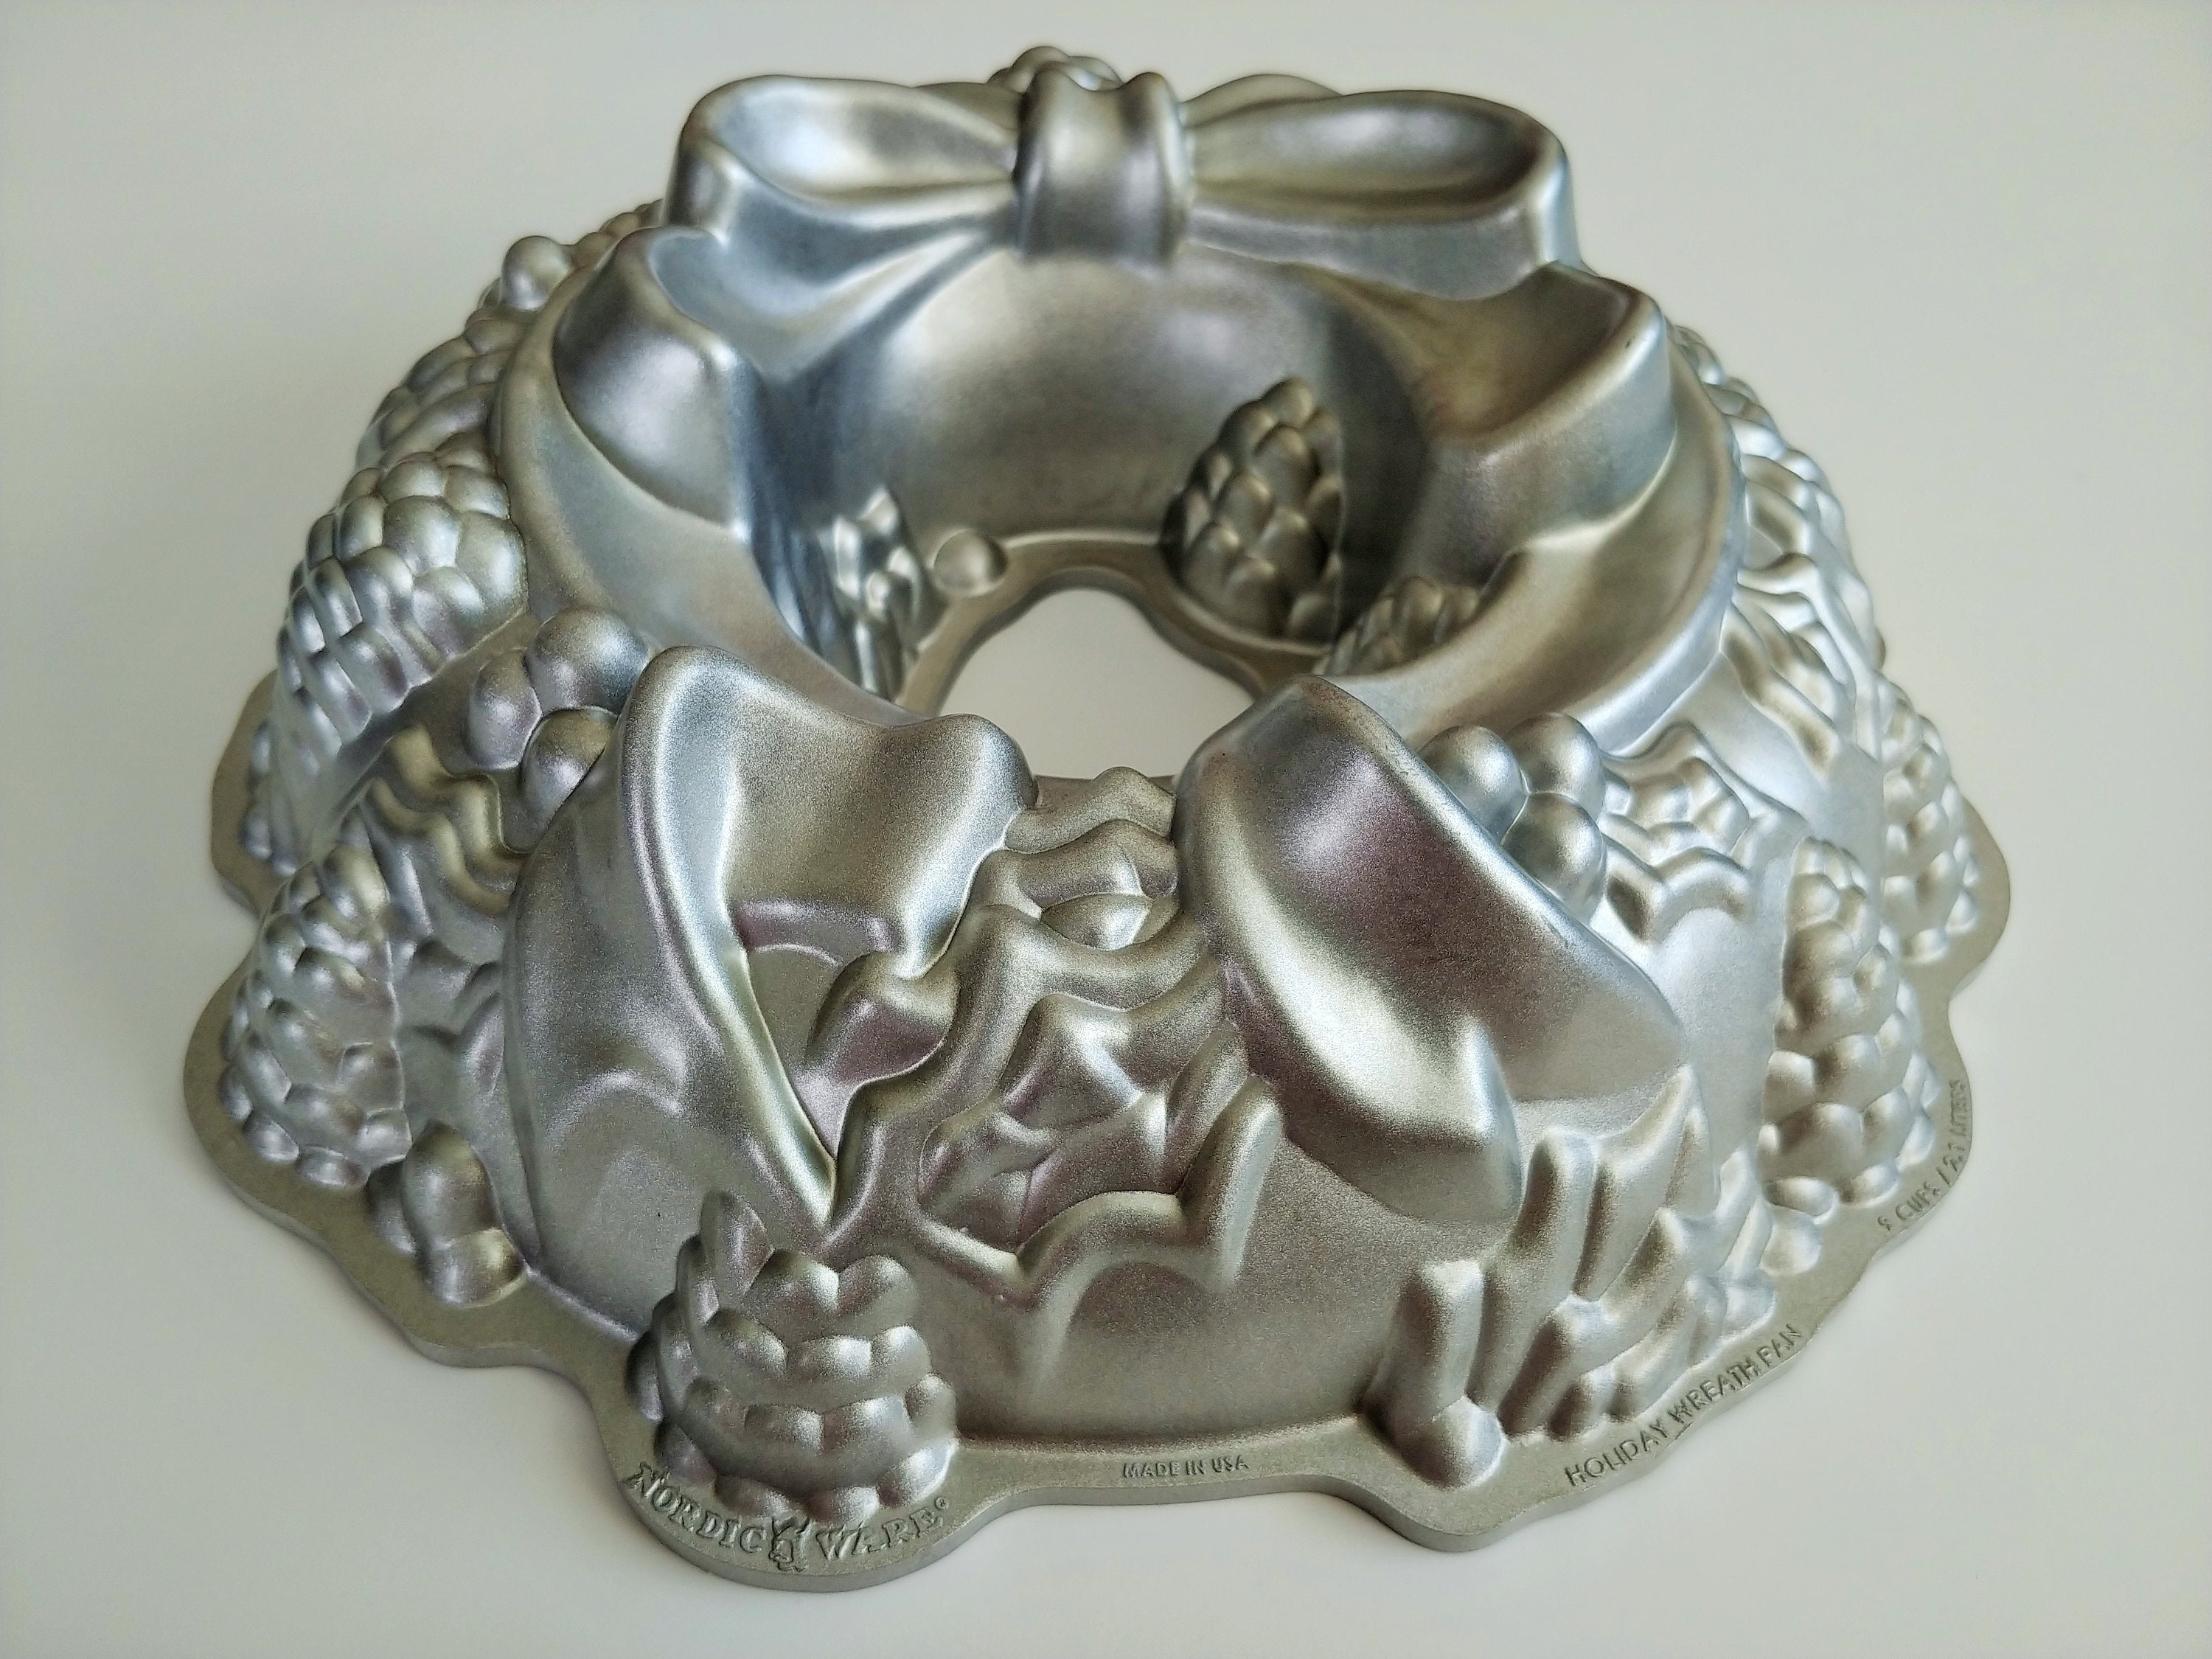 Nordic Ware 2006 60th Anniversary Cast Aluminum 10-15 Cup Bundt Pan -  household items - by owner - housewares sale 